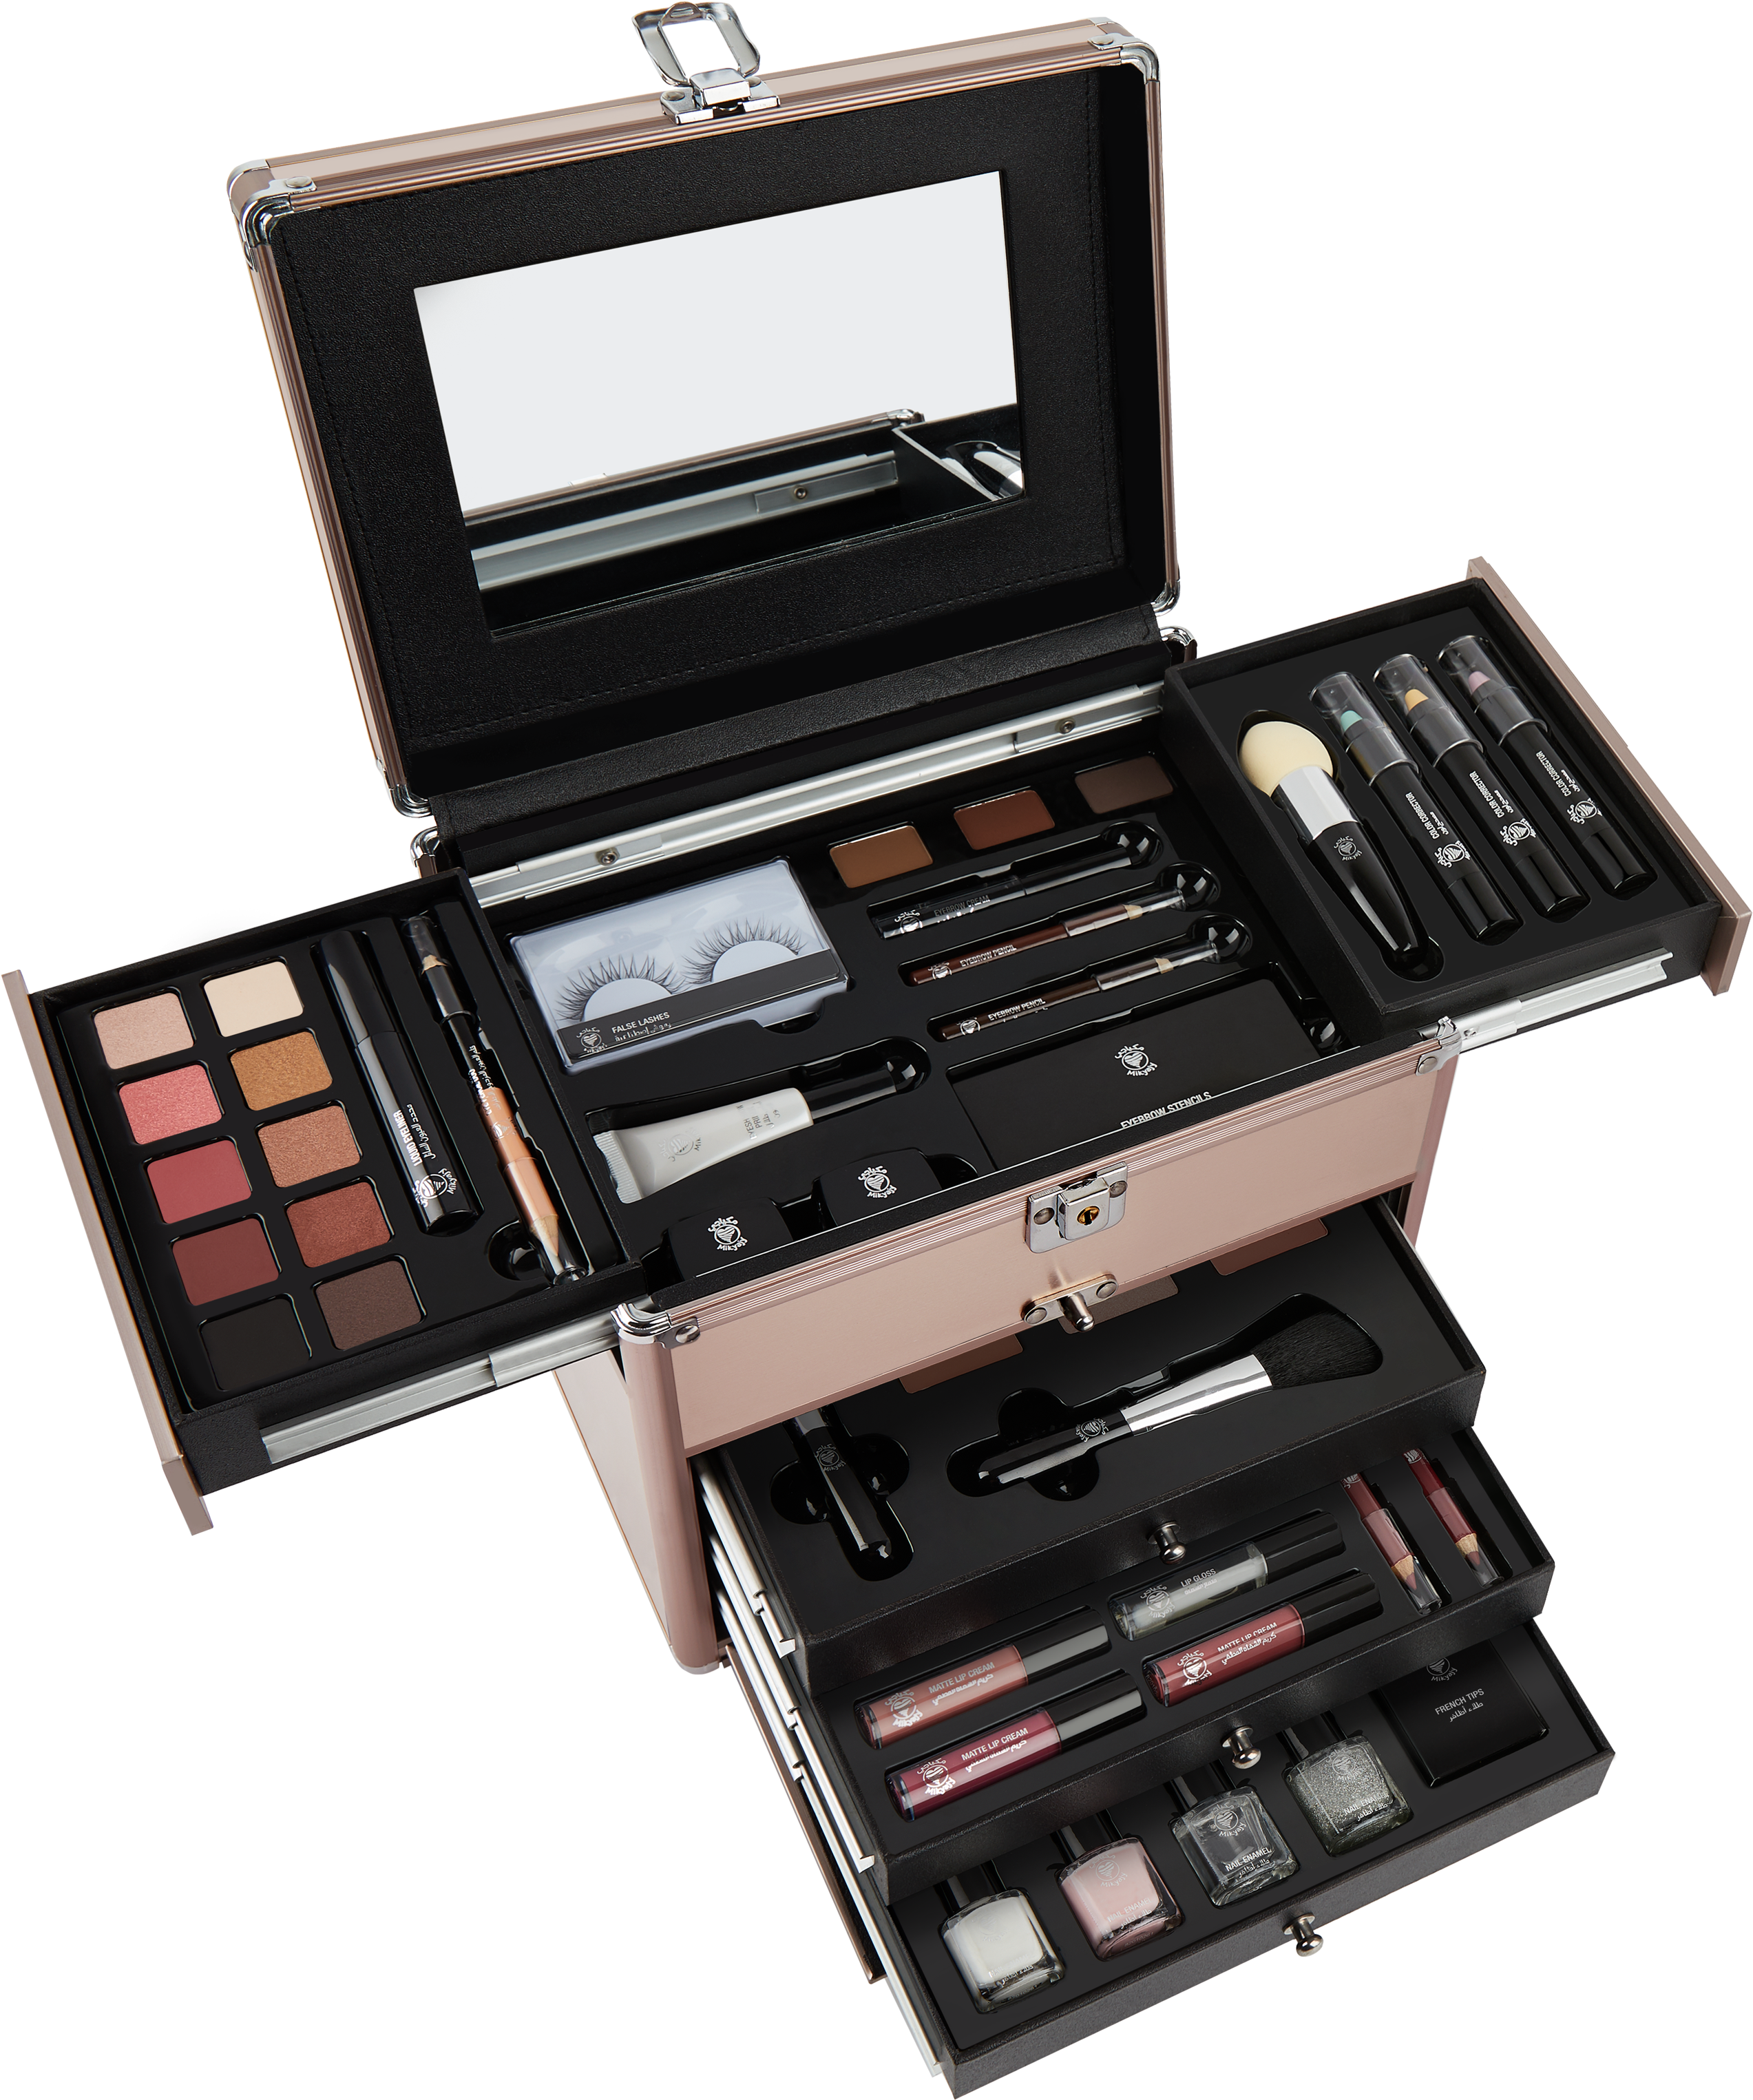 A Makeup Case With A Mirror And Makeup Brushes